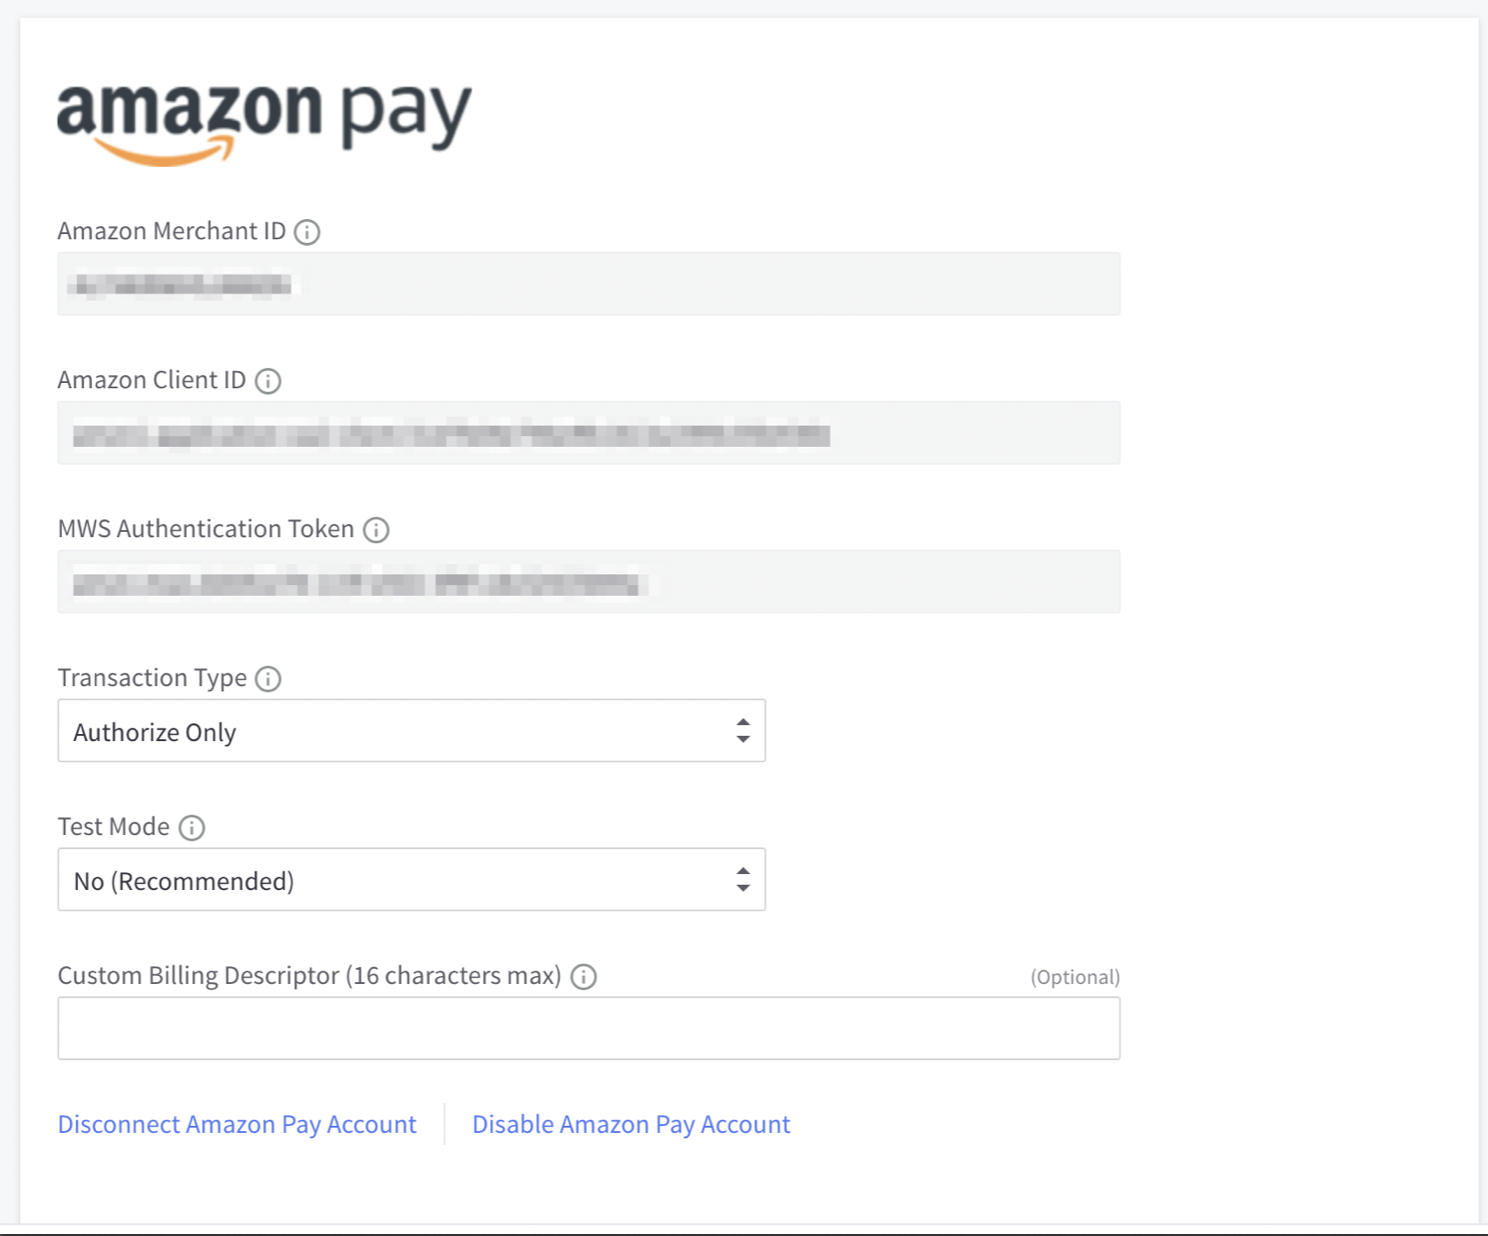 The Amazon Pay settings screen in BigCommerce with Merchant ID, Client ID, and MWS Authentication Token fields filled in